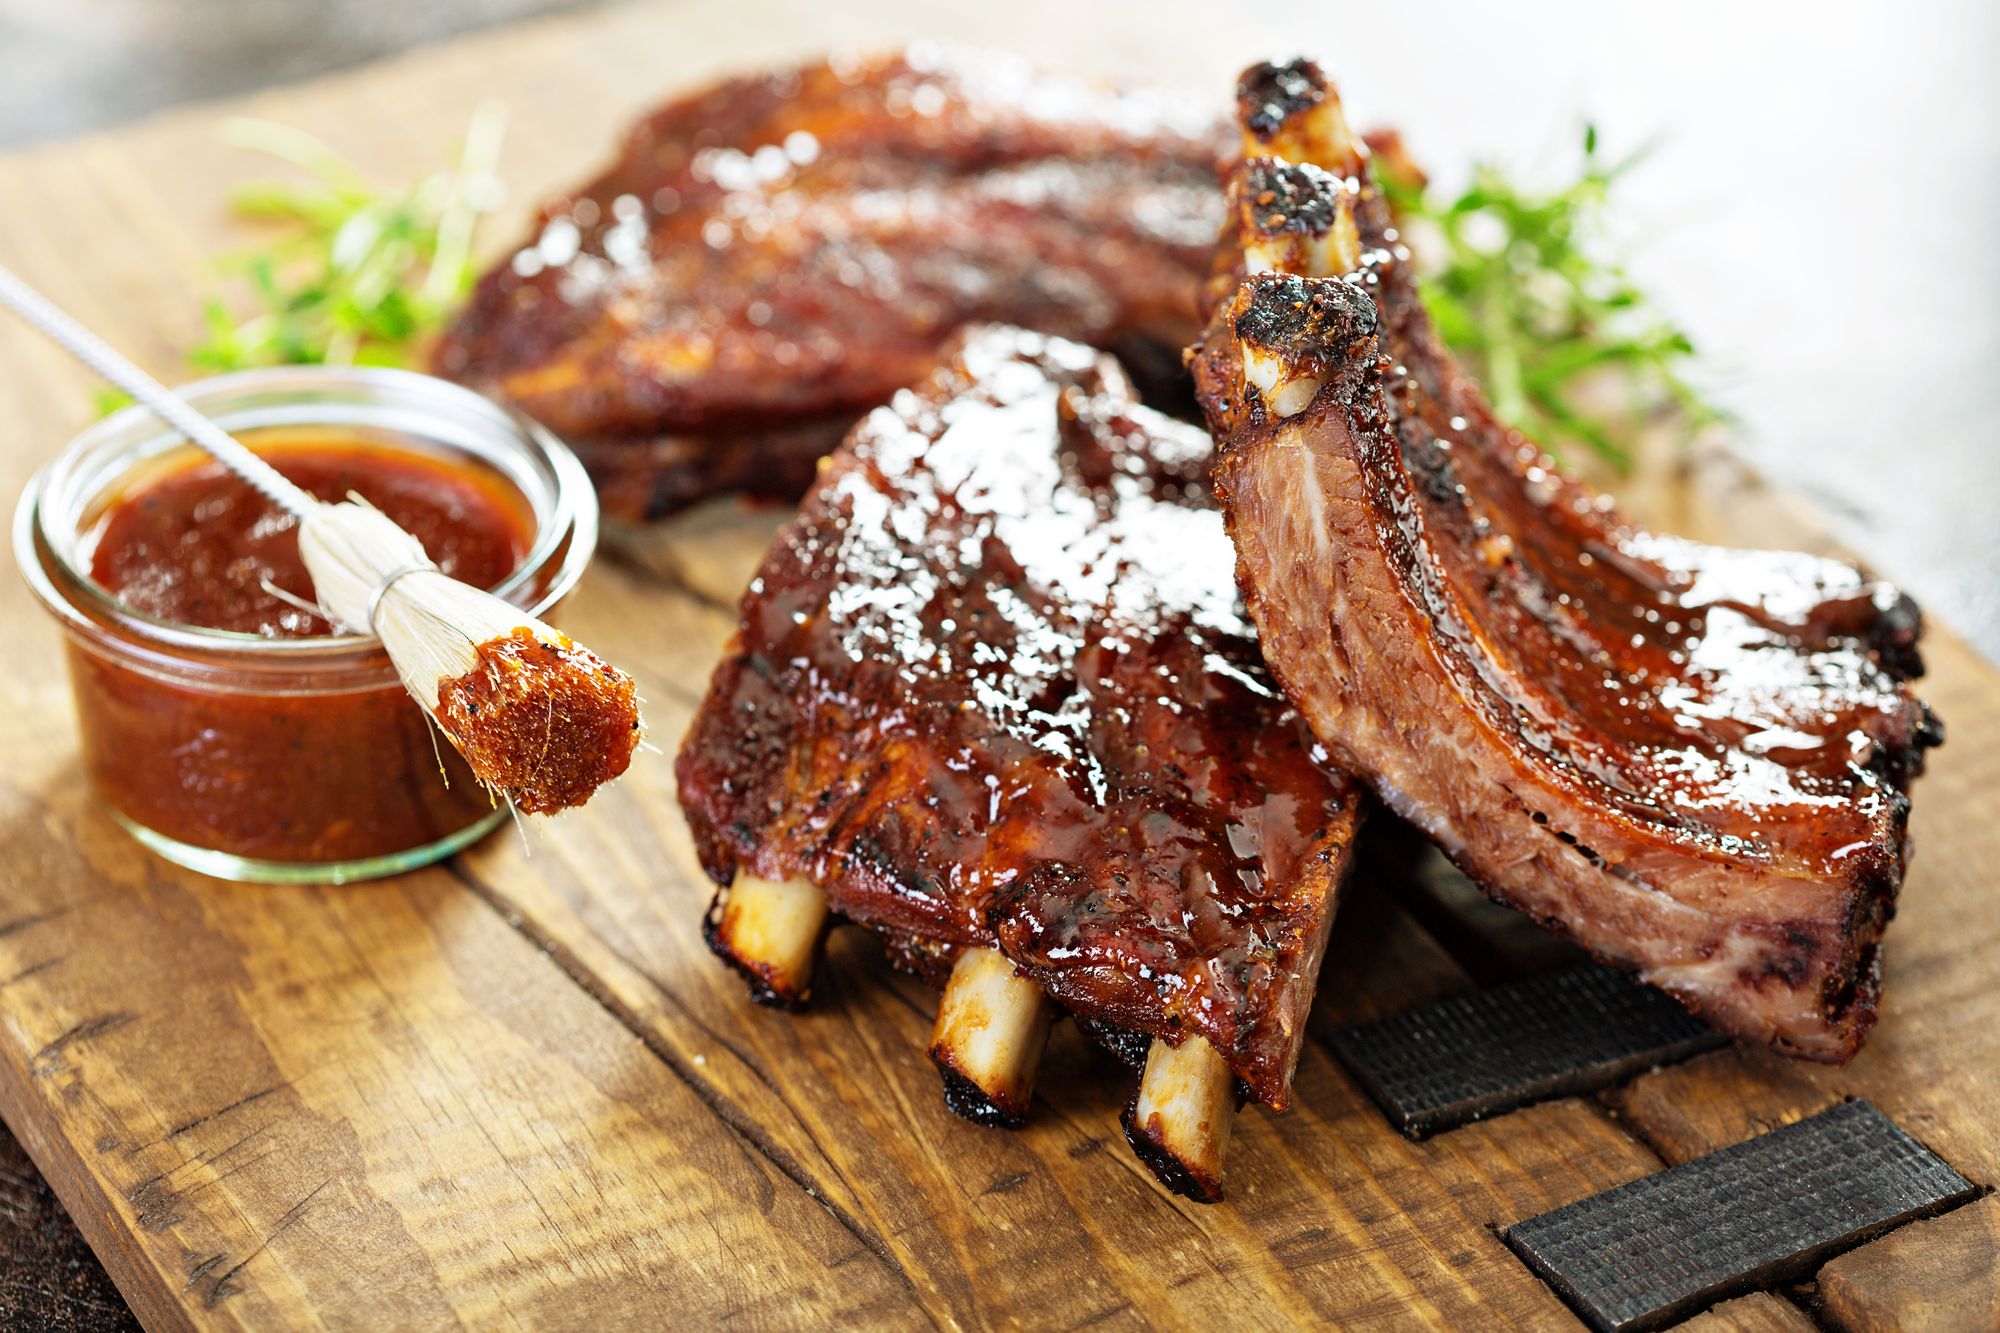 Spice Up Your Summer With These Delicious BBQ Sauce Recipes